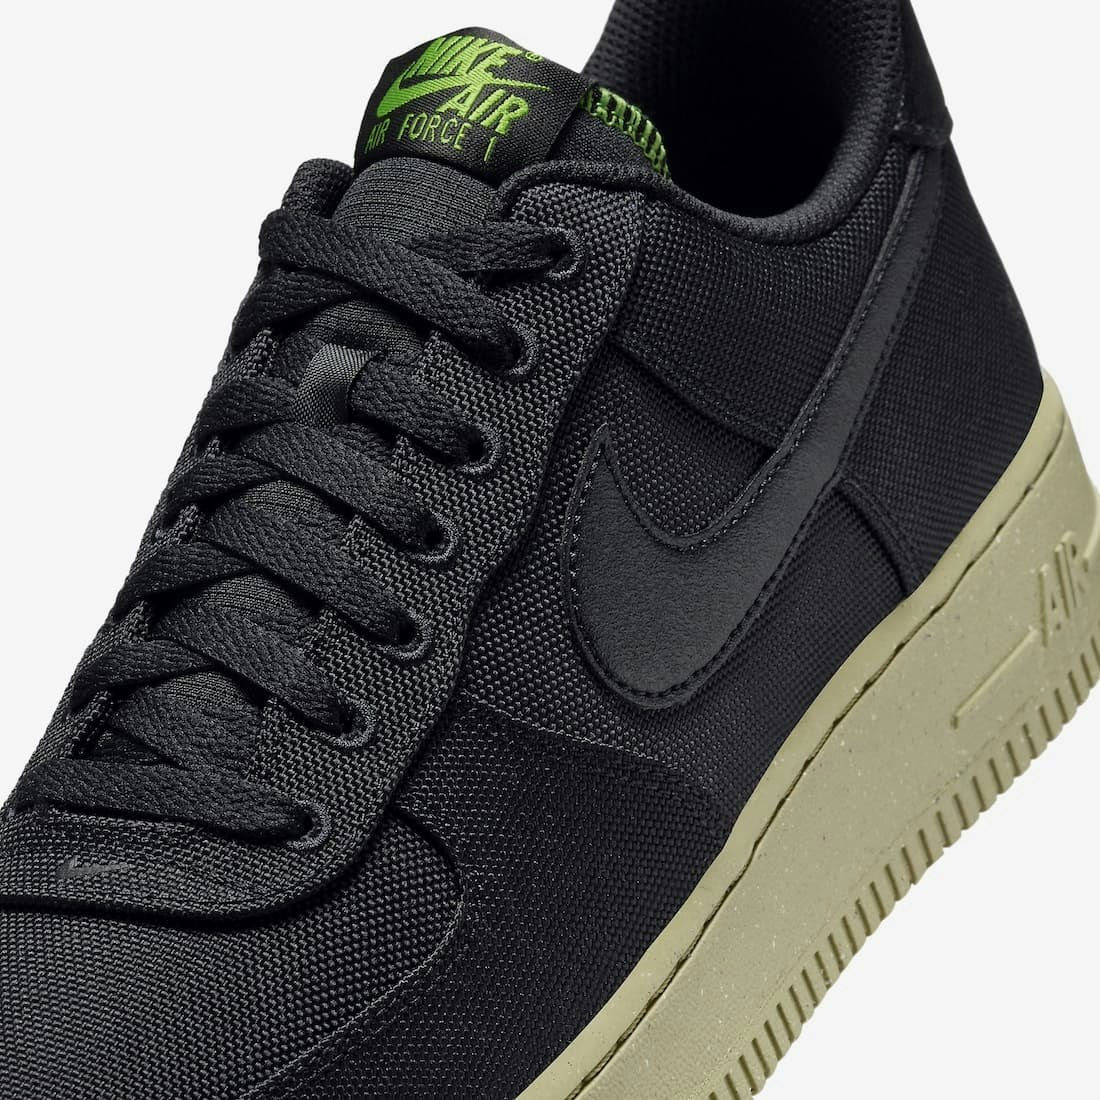 Nike Air Force 1 Low "Olive Chlorophyll"